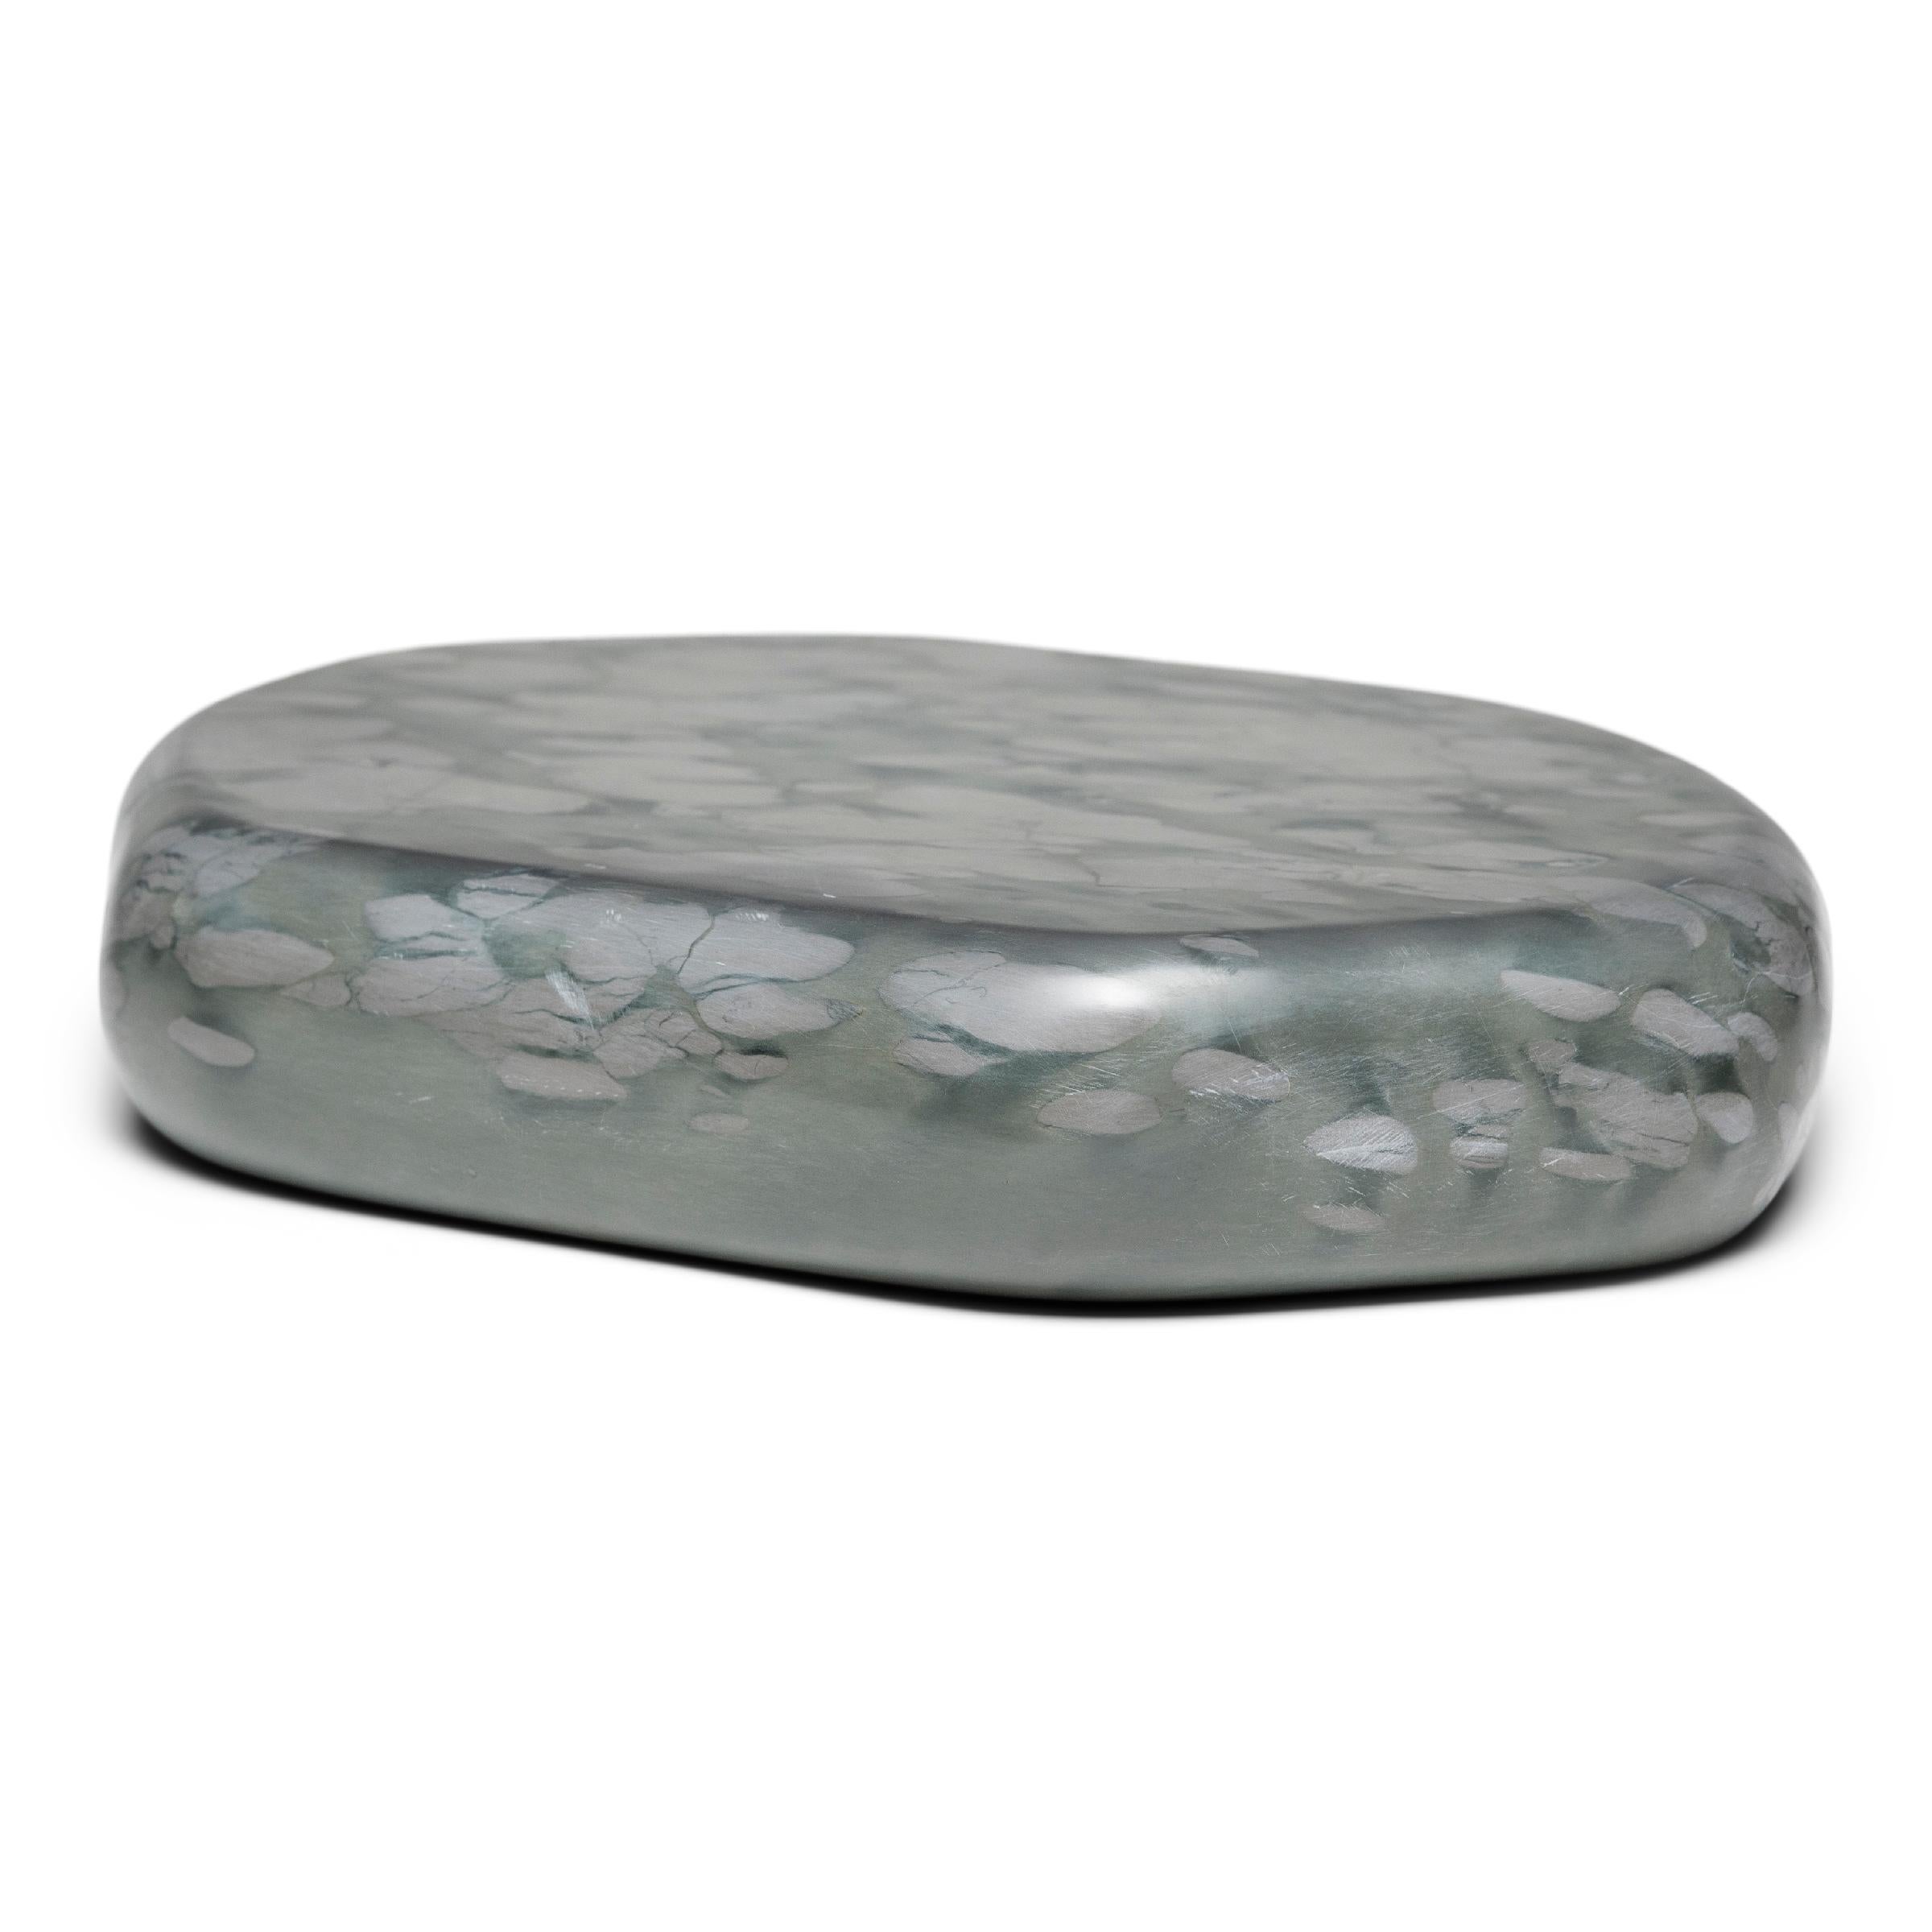 This small stone slab tray is formed of zhenzhu stone, a conglomerate limestone extracted from Lake Tai in China's Jiangsu province. Speckled with painterly daubs of color, the blue-grey puddingstone has been prized by scholars for centuries as a